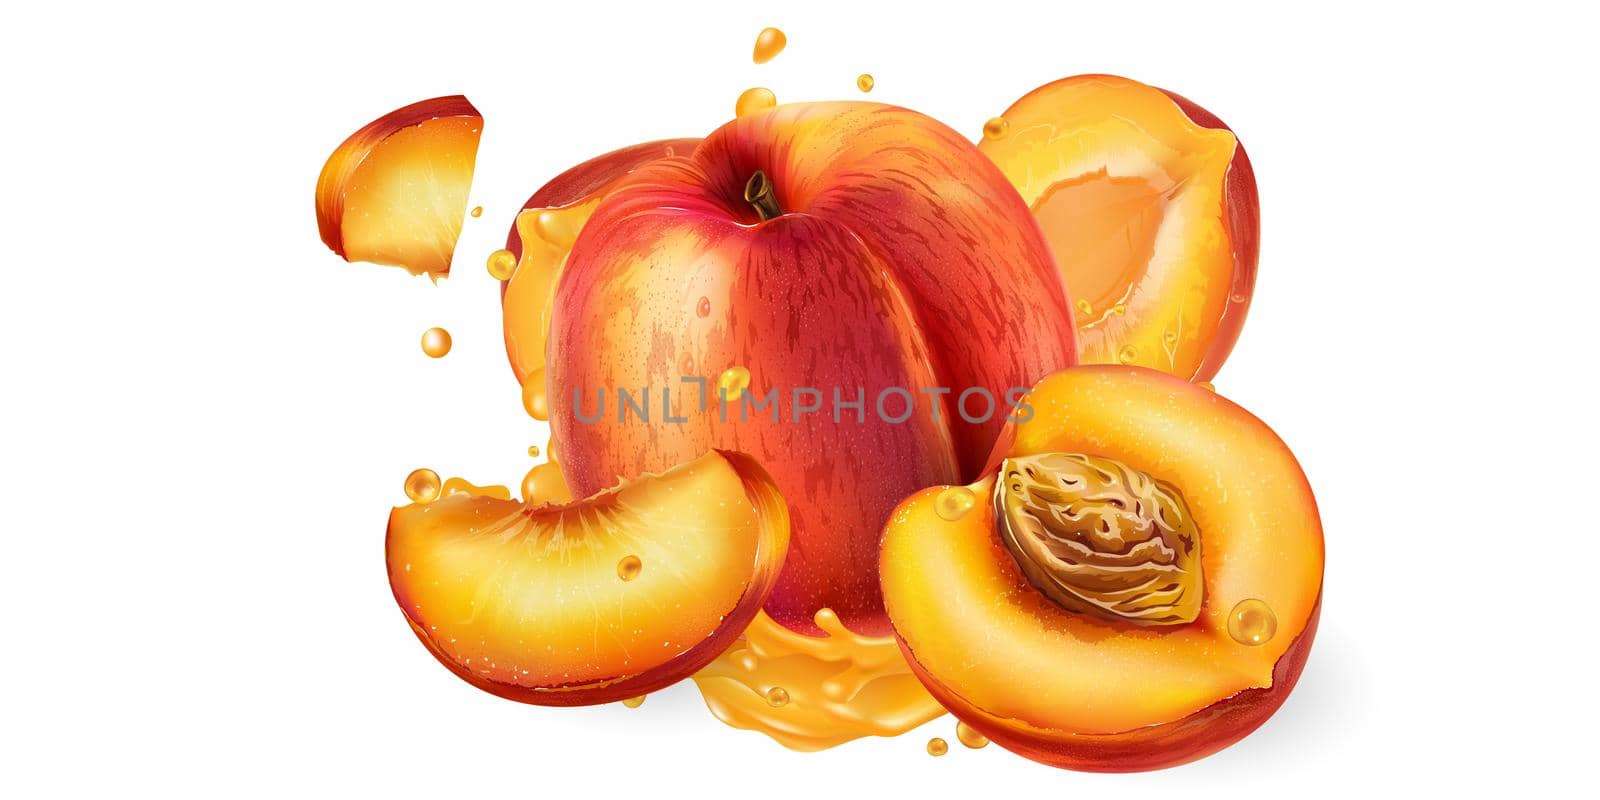 Whole and sliced peaches in fruit juice splashes on a white background. Realistic style illustration.